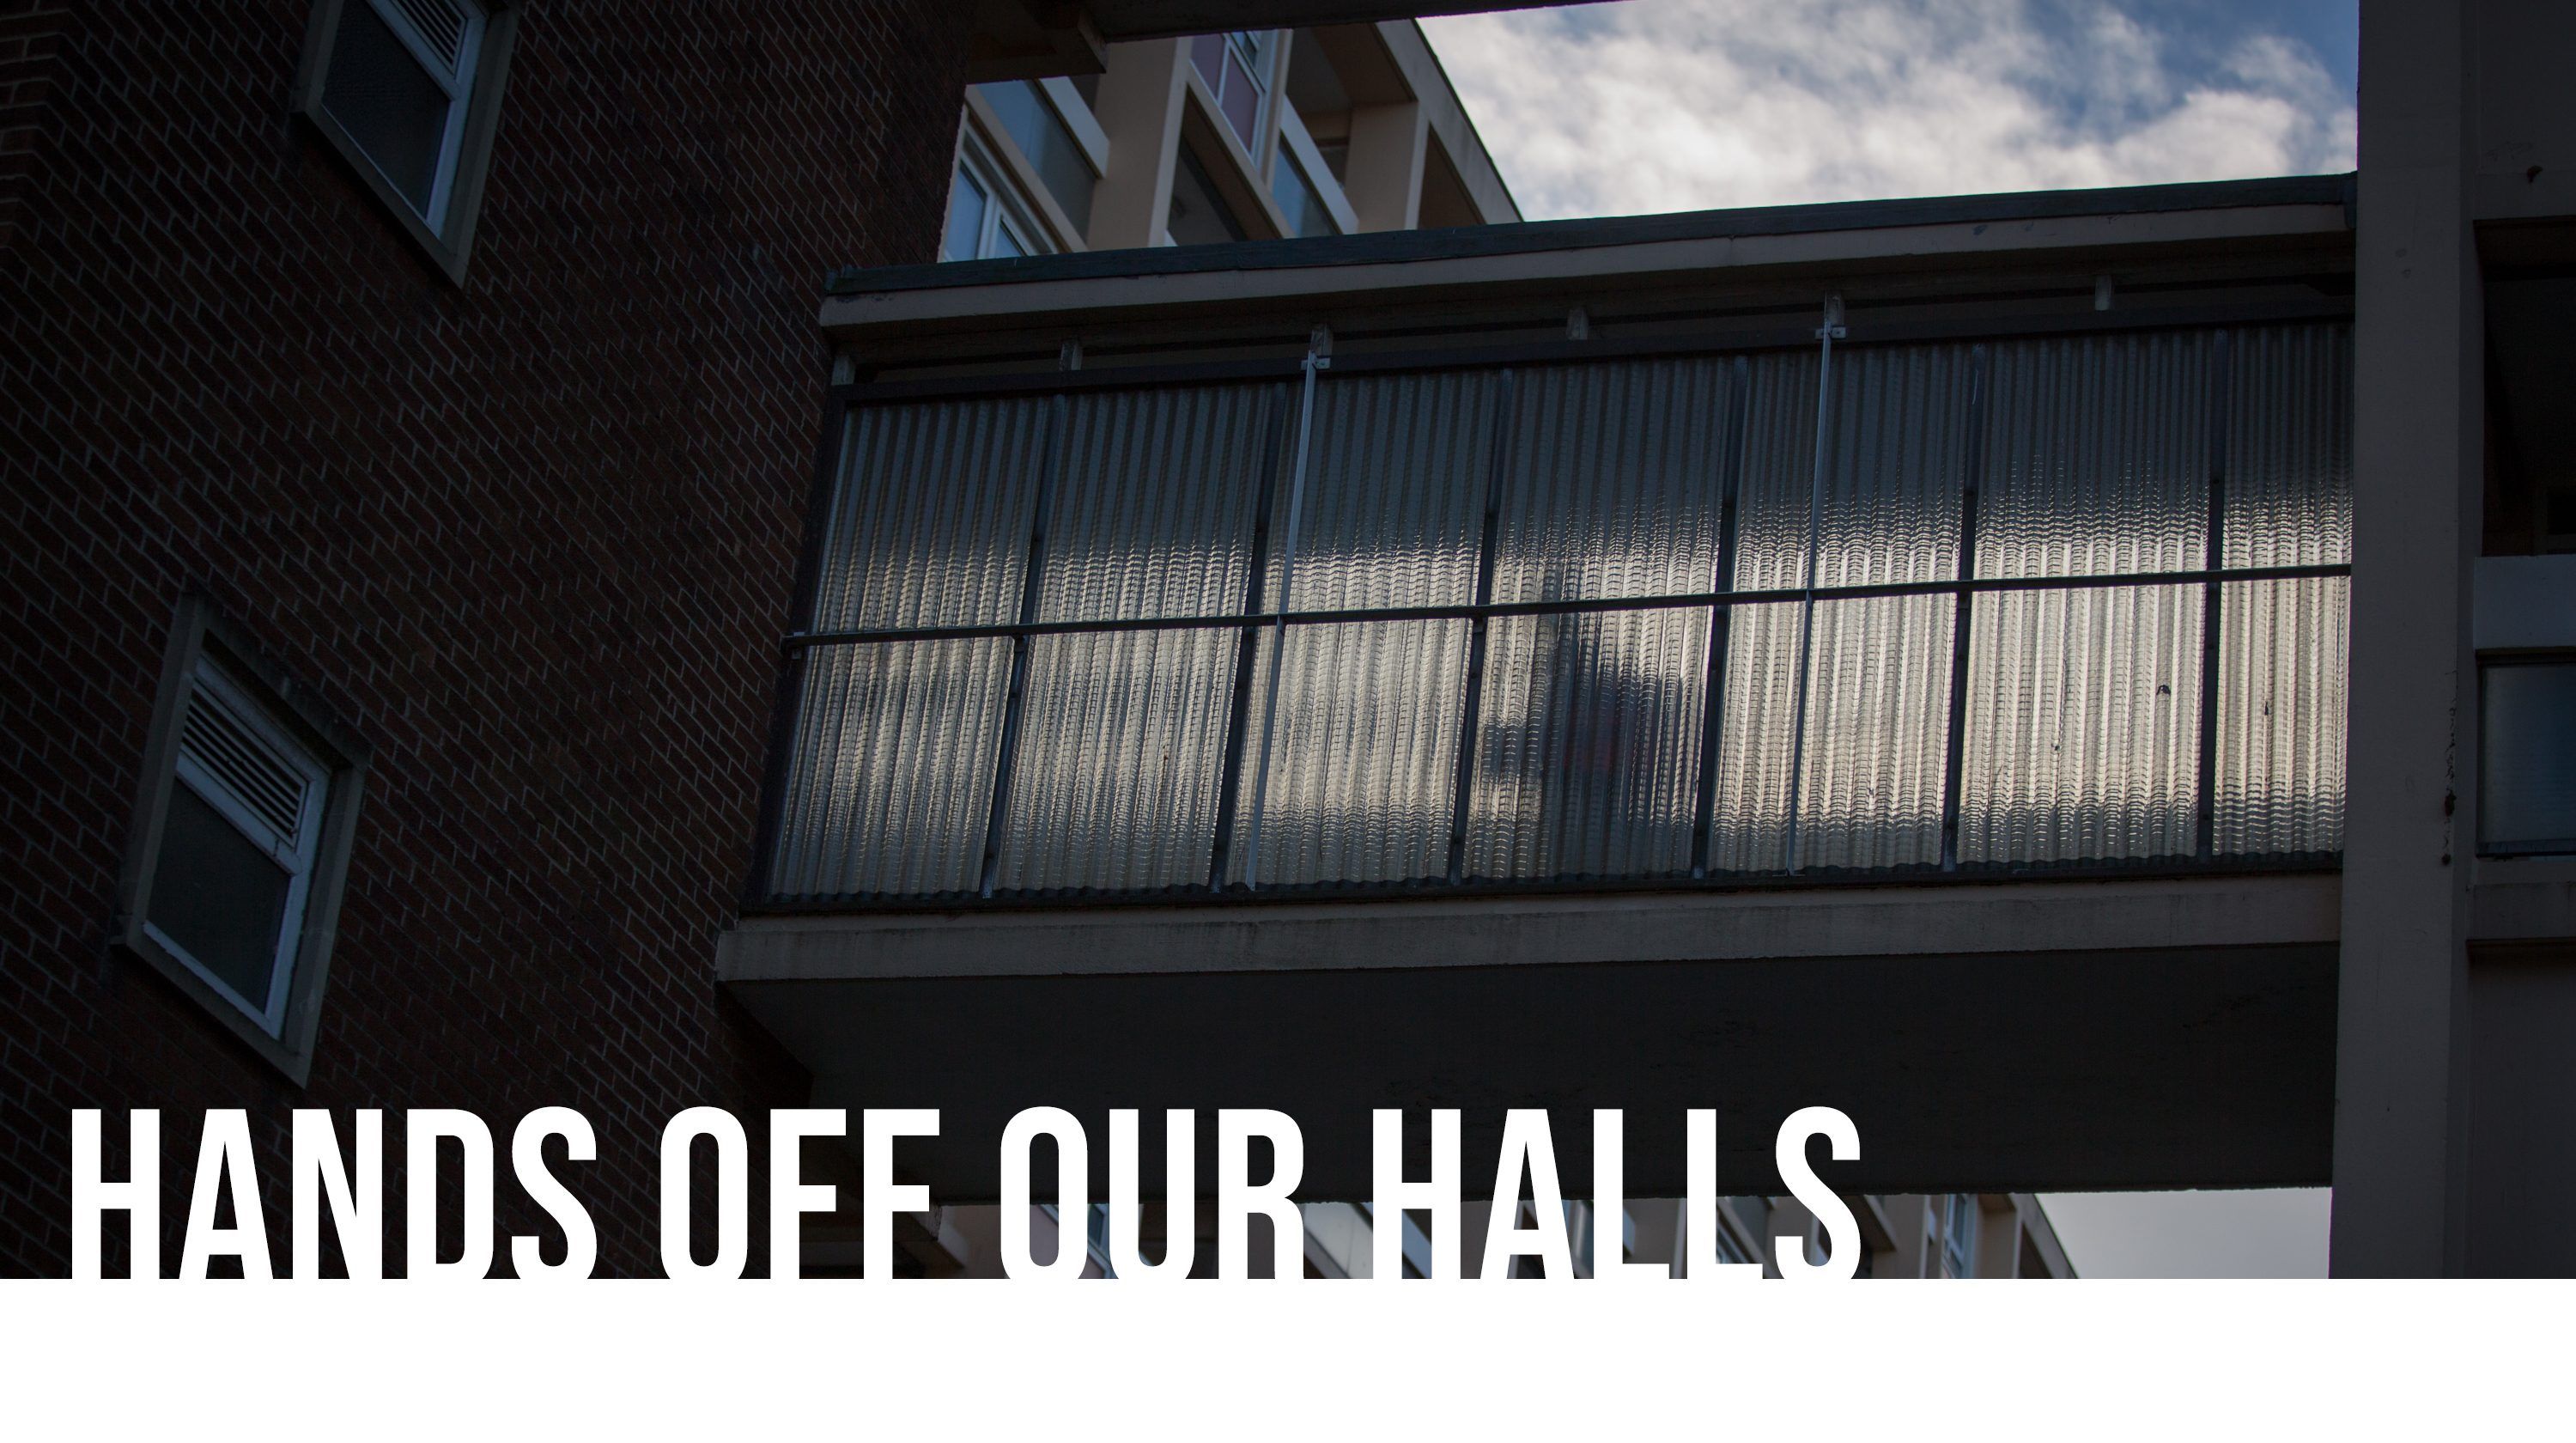 Suicide at the University of Bristol, Hands Off Our Halls